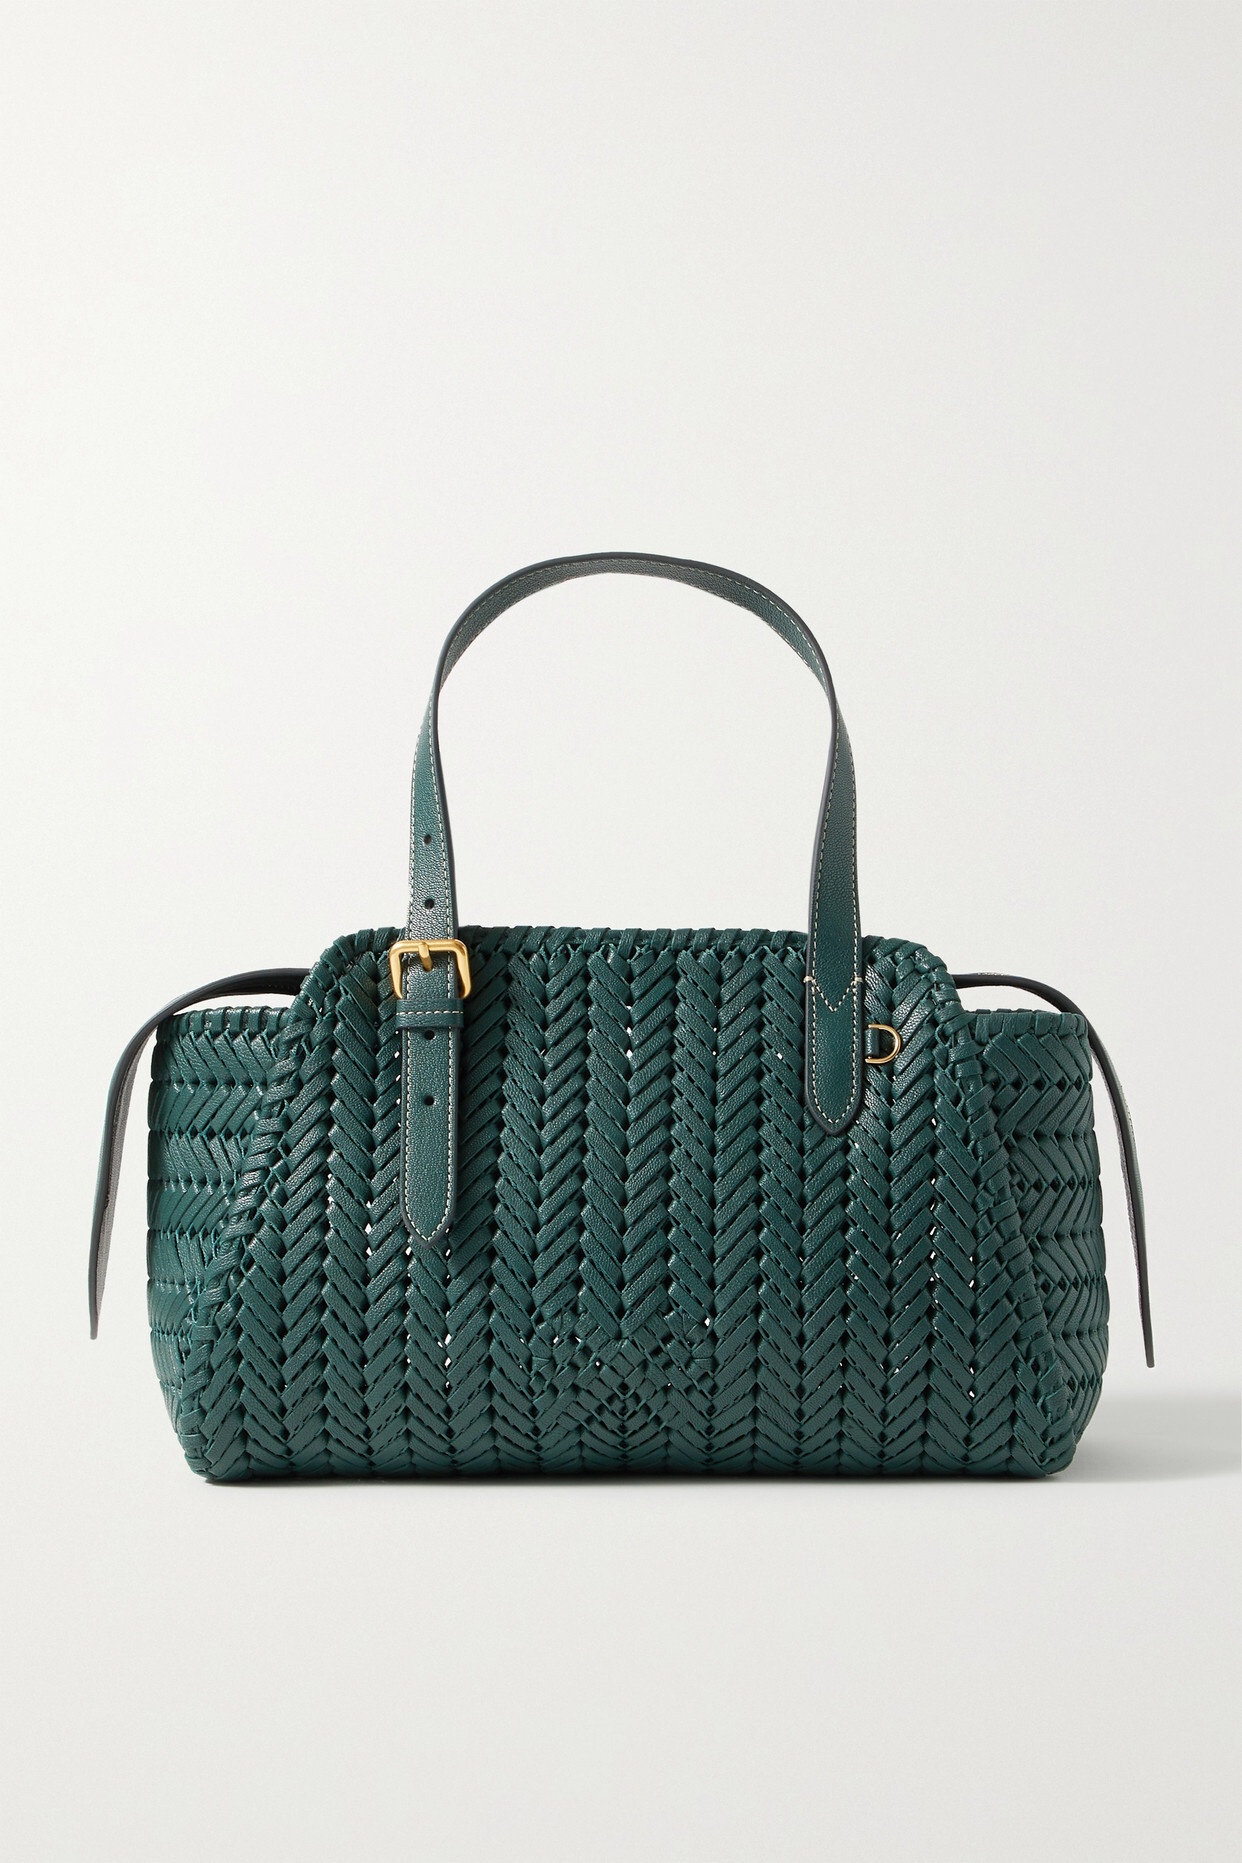 Anya Hindmarch - The Neeson Woven Textured-leather Tote - Green